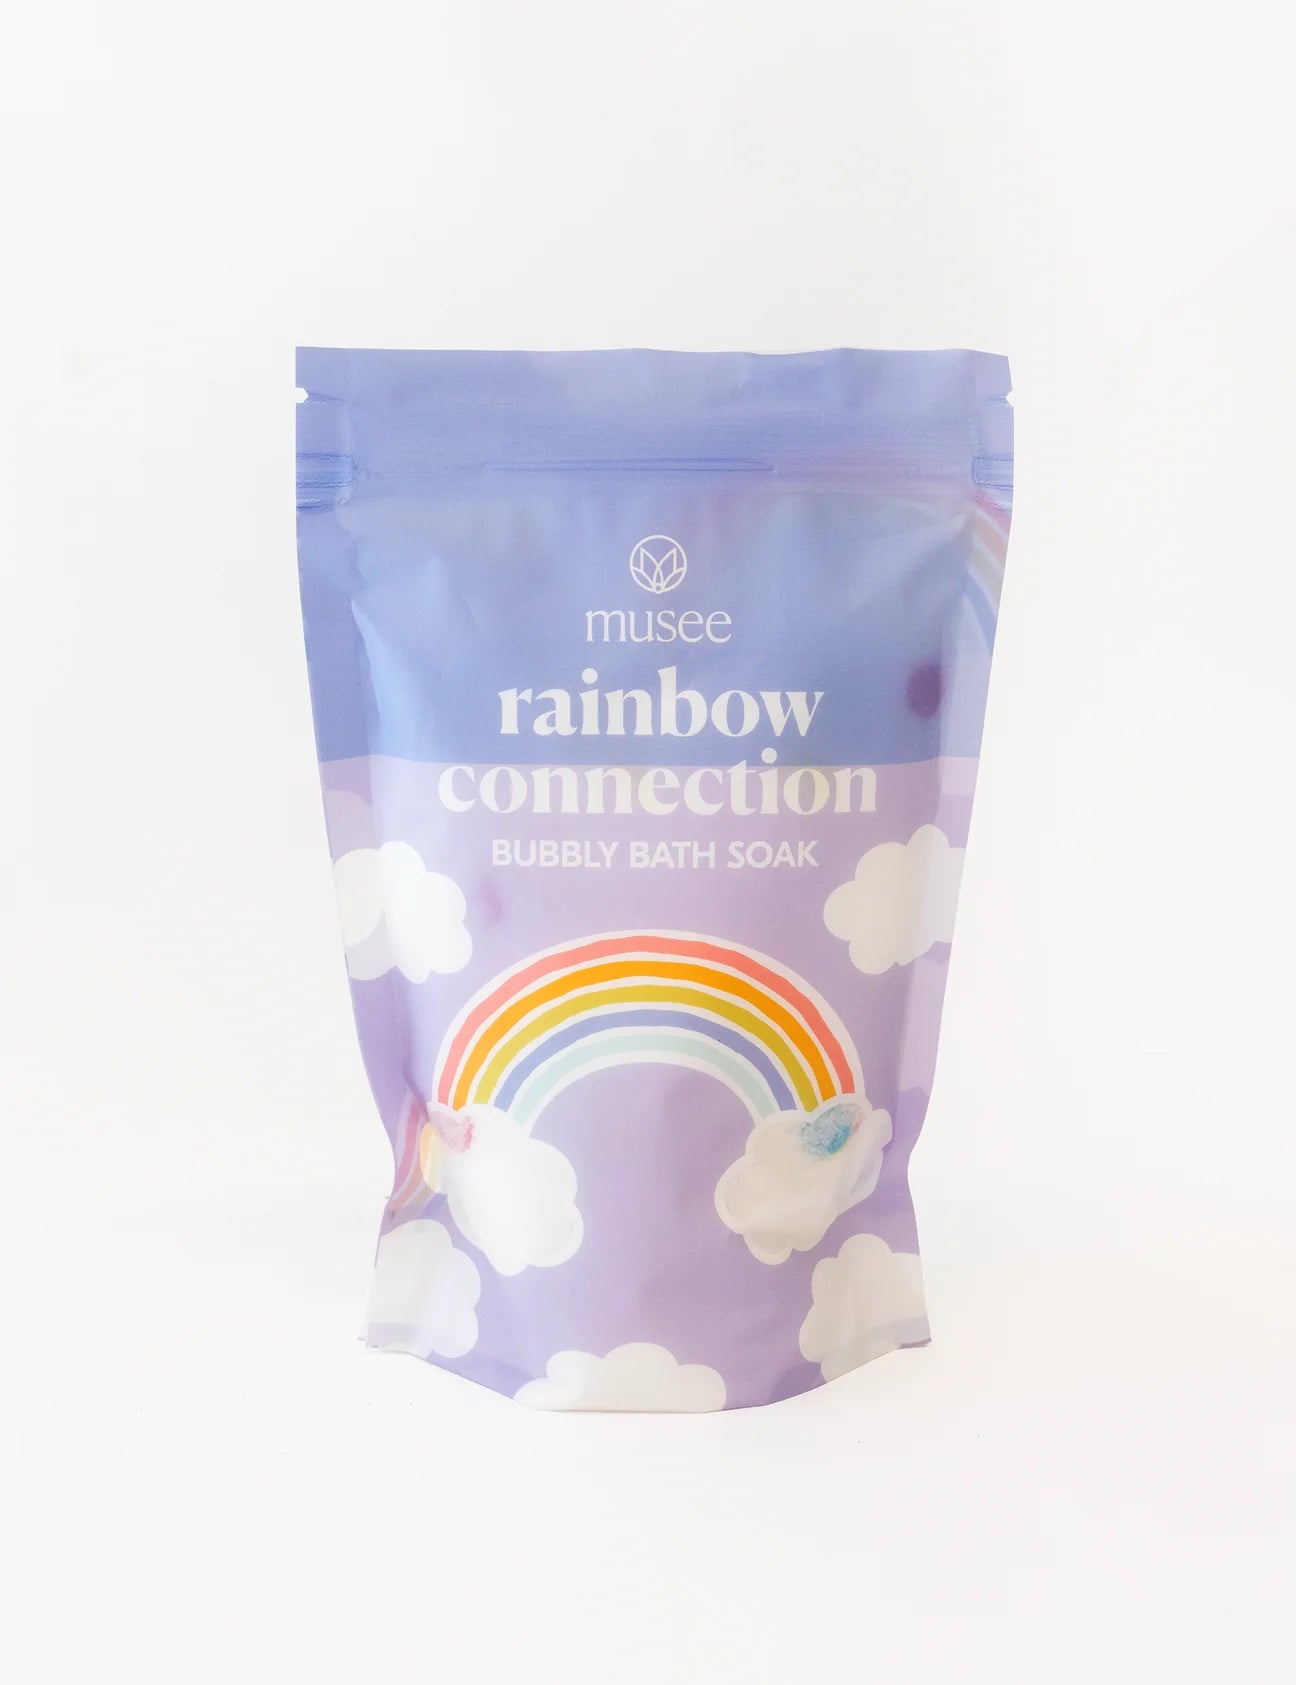 Immerse yourself in a magical bathing experience with Musee's Rainbow Connection Bubbly Bath Soak. This enchanting bag creates a whimsical oasis, filling your tub with vibrant colors and blissful bubbles.